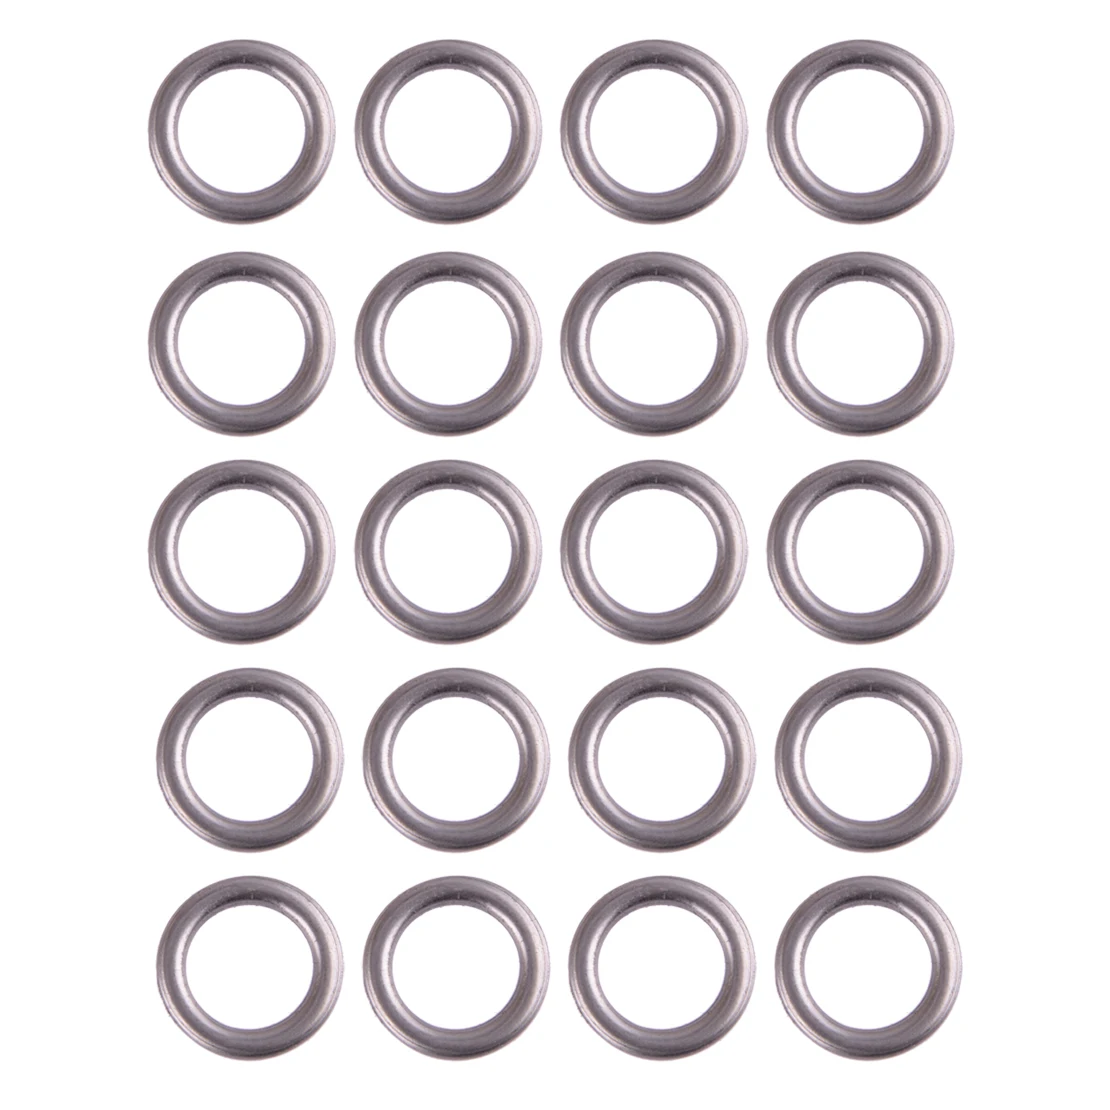 

20Pcs/set Oil Transmission Drain Plug Gaskets Seal Rings 3517830010 Fit For Lexus SC300 IS350 SC400 Toyota 4Runner Tacoma Tundra